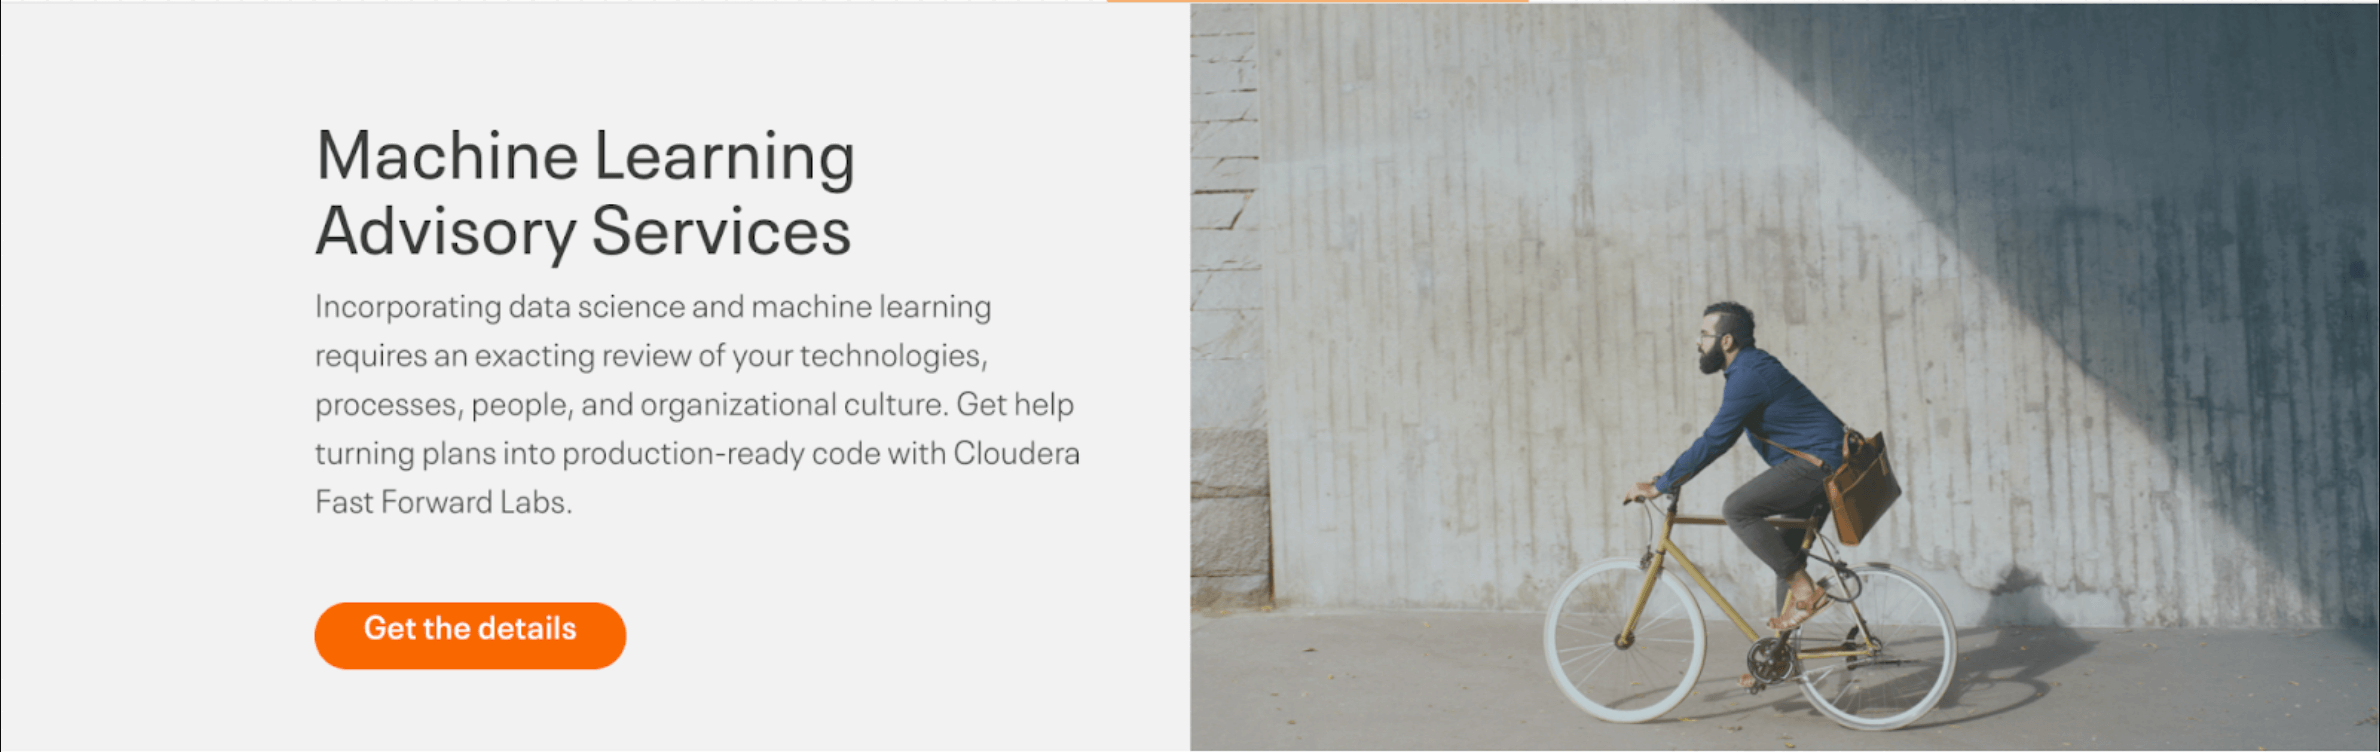 Cloudera Machine Learning services page